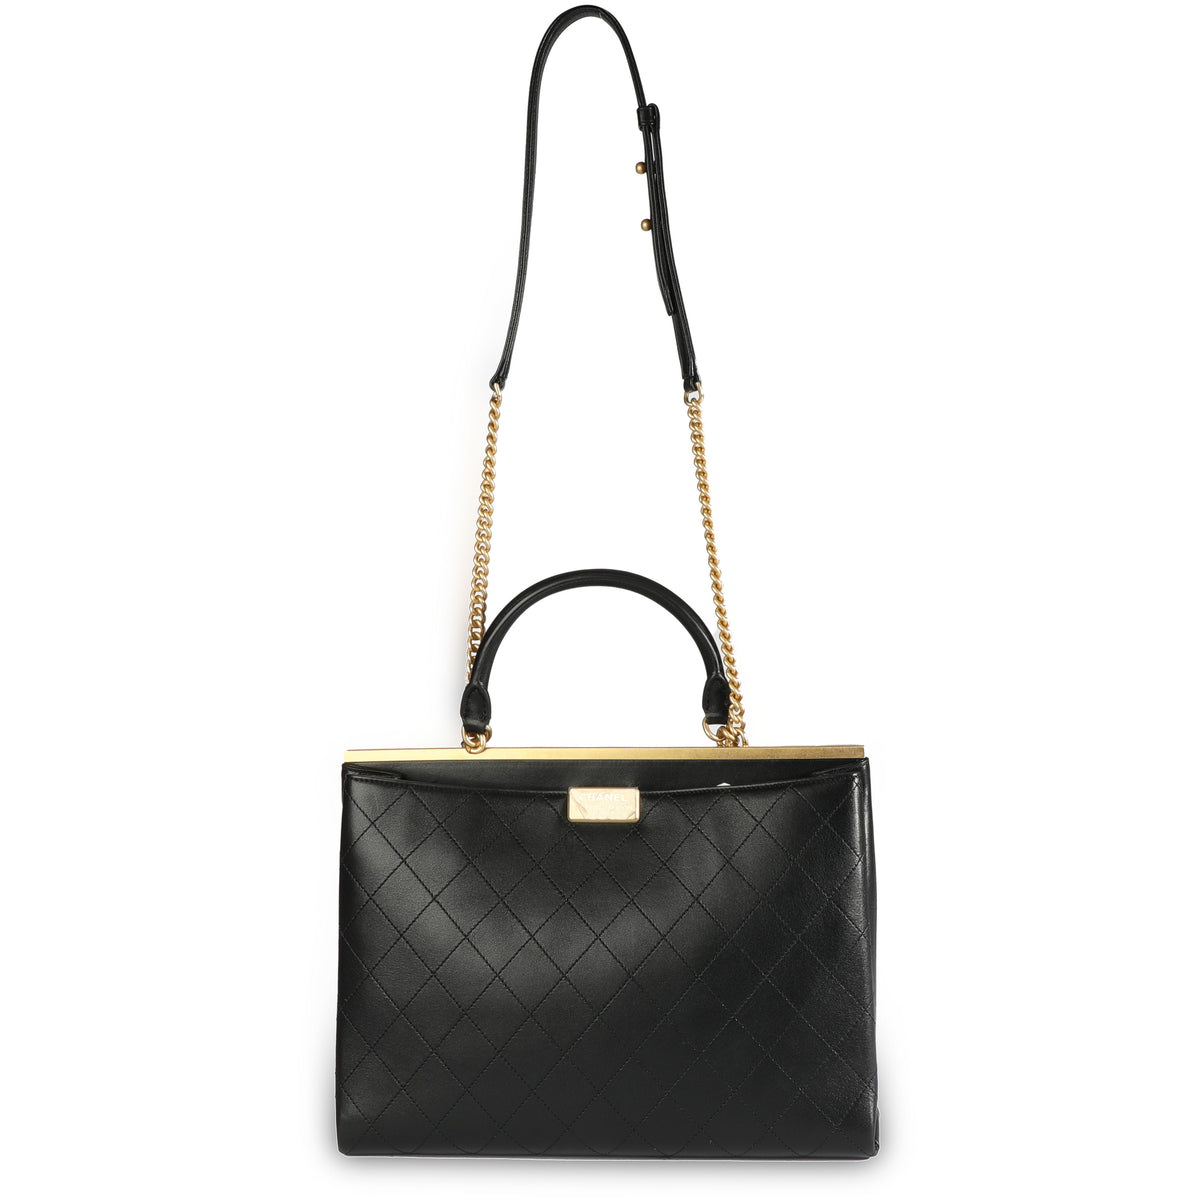 Chanel Black Quilted Calfskin Coco Luxe Large Shopping Bag by WP